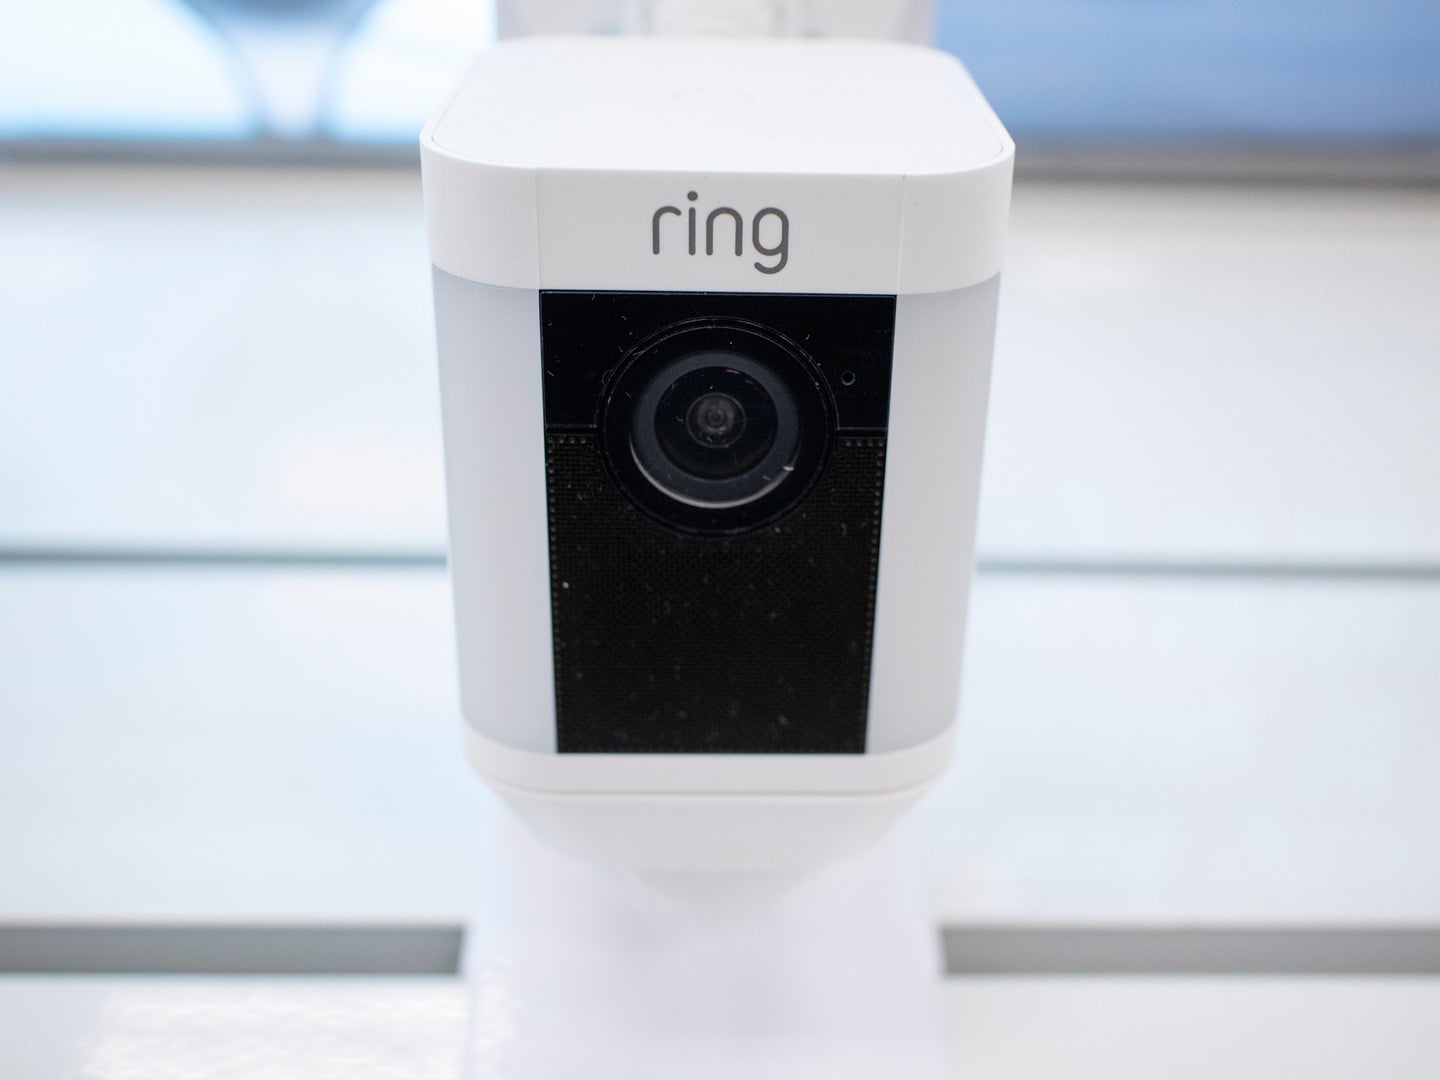 Close up of Amazon Ring security camera mounted outside building